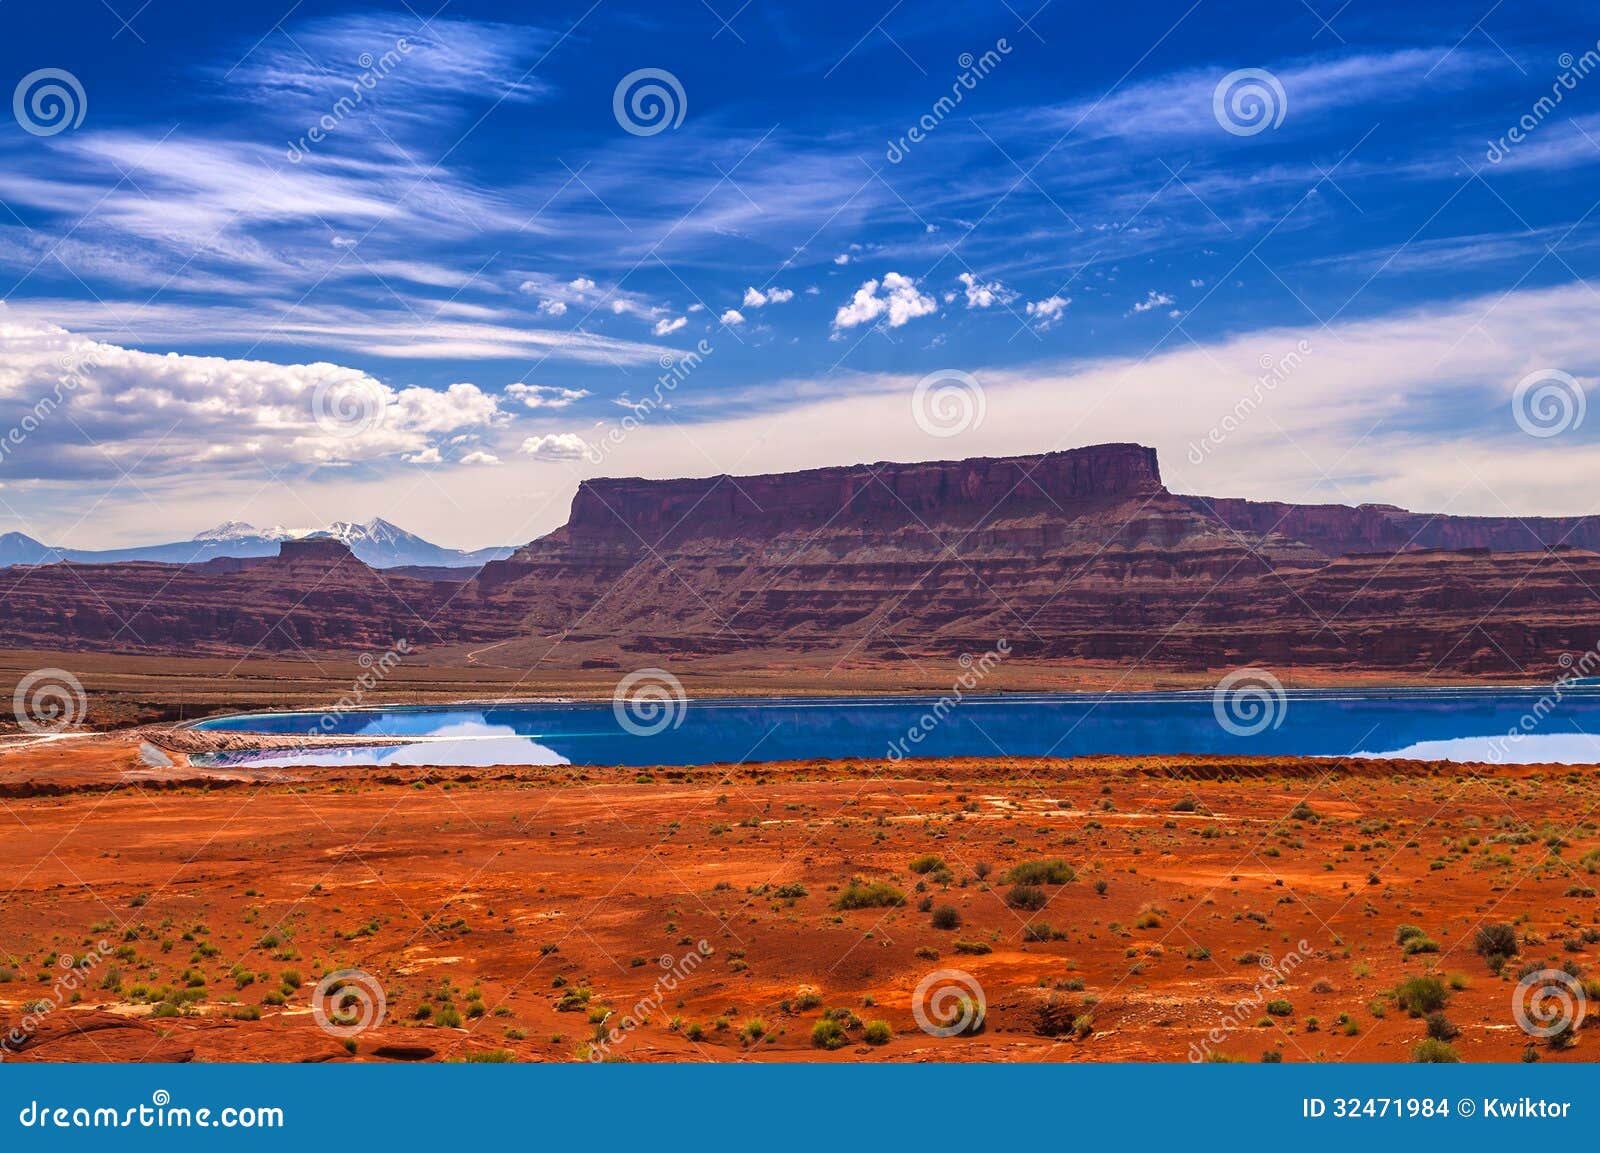 Evaporation Ponds near Potash Road in Moab Utah. Evaporation Pools with La Sale Mountains in the Back against beautiful blue sky